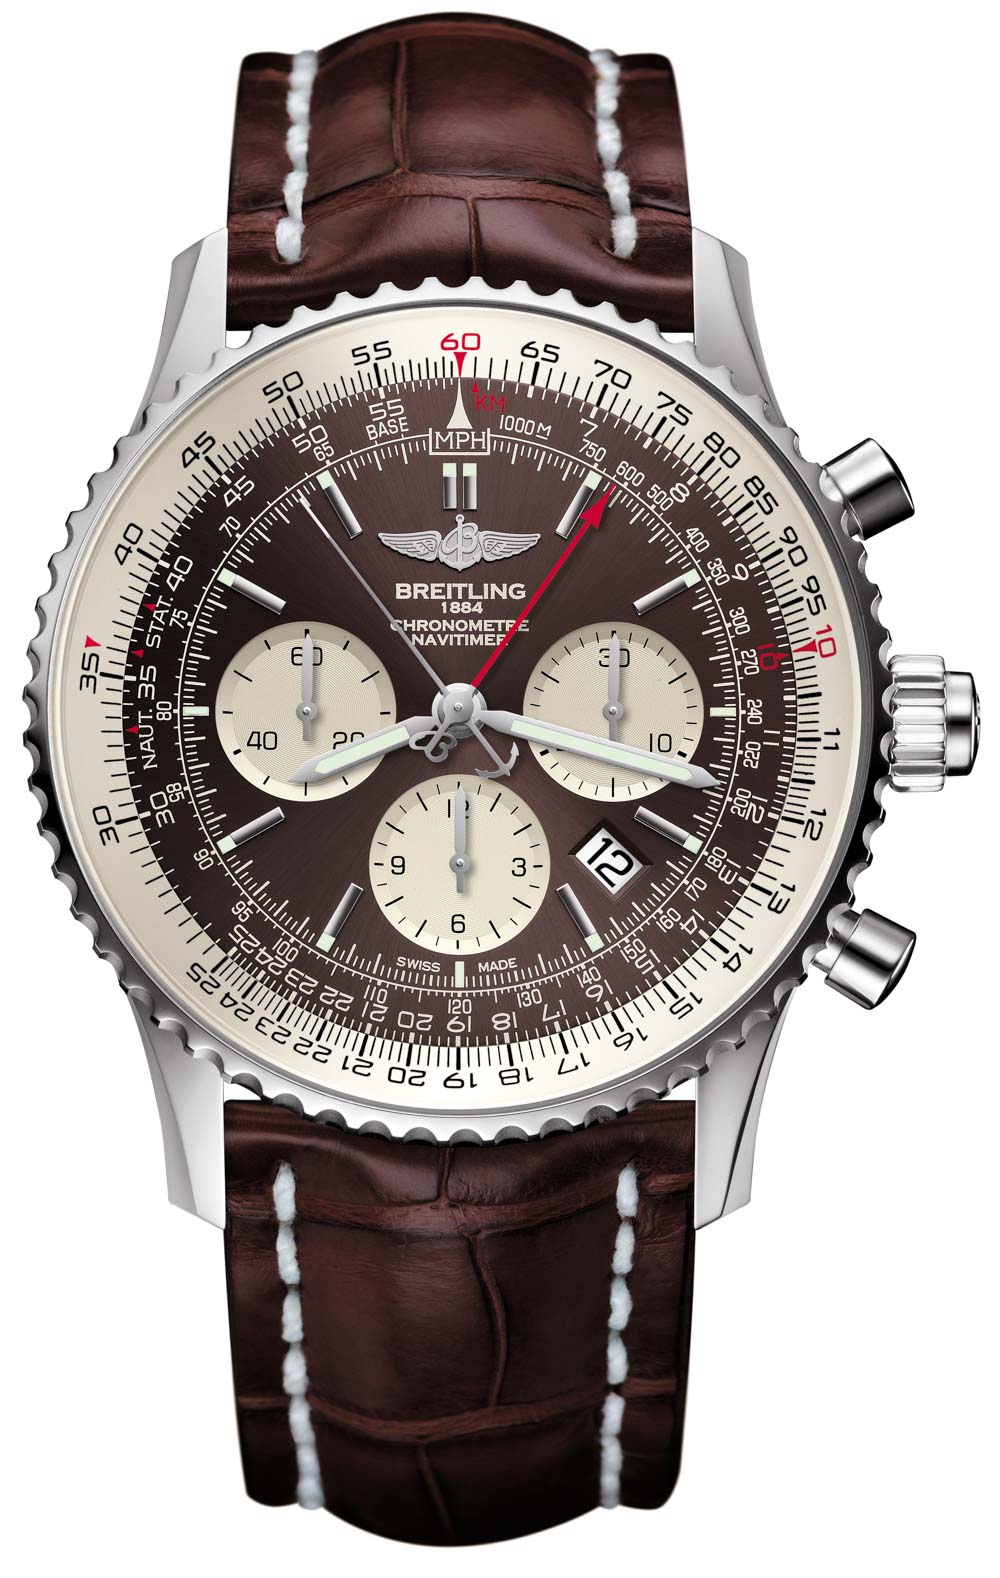 Breitling-Navitimer-Rattrapante-watch-3